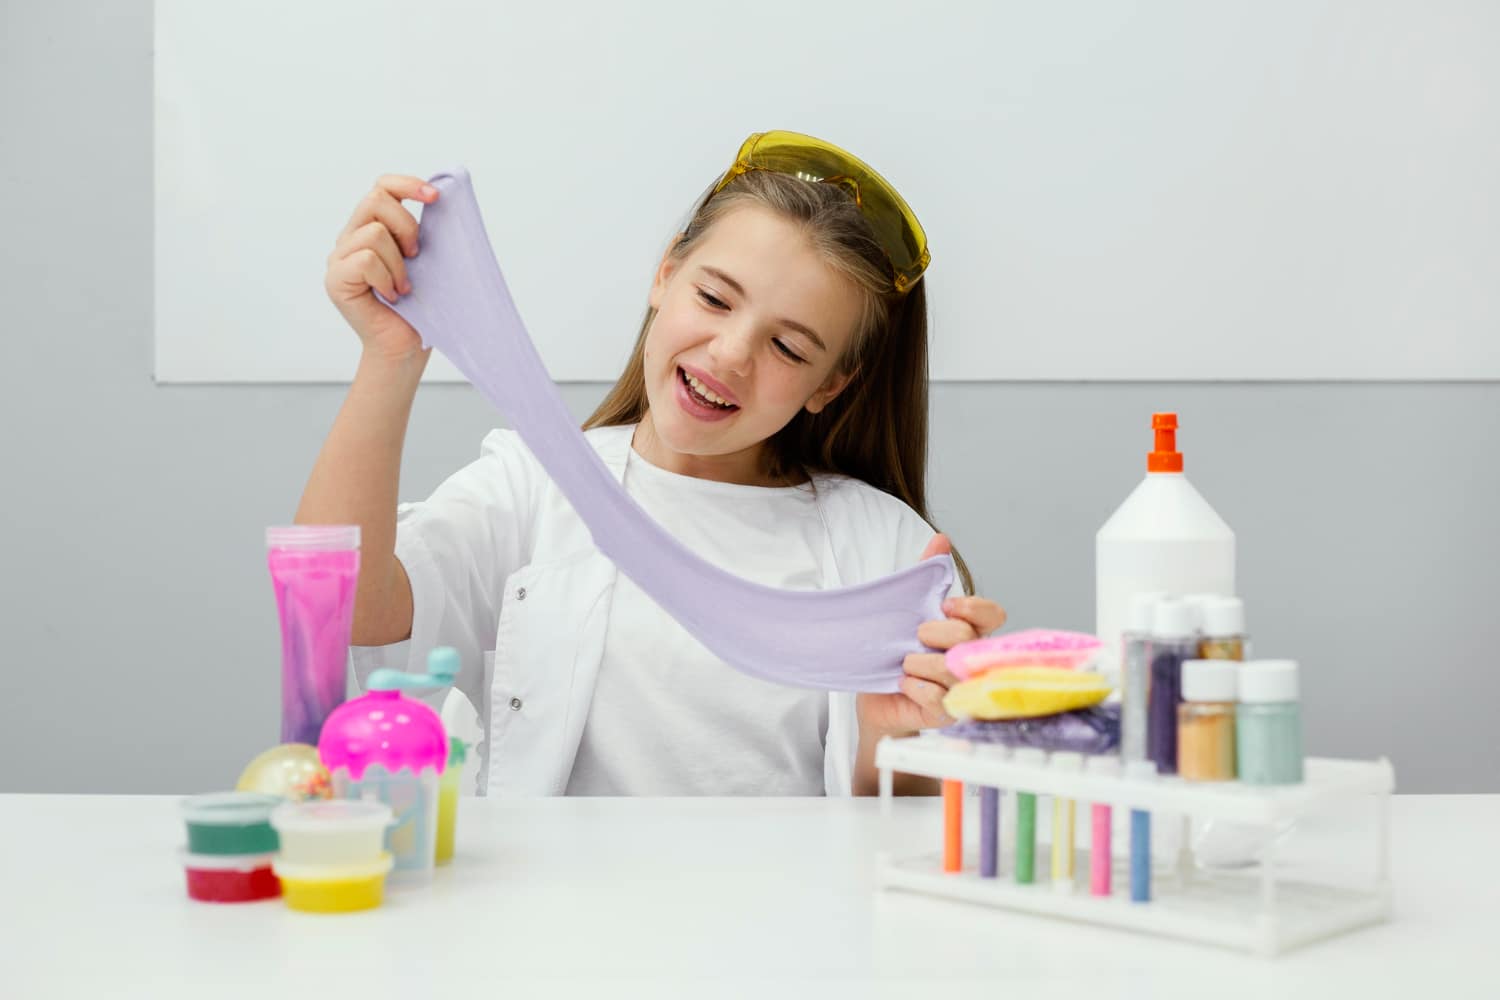 smiley-young-girl-scientist-making-slime